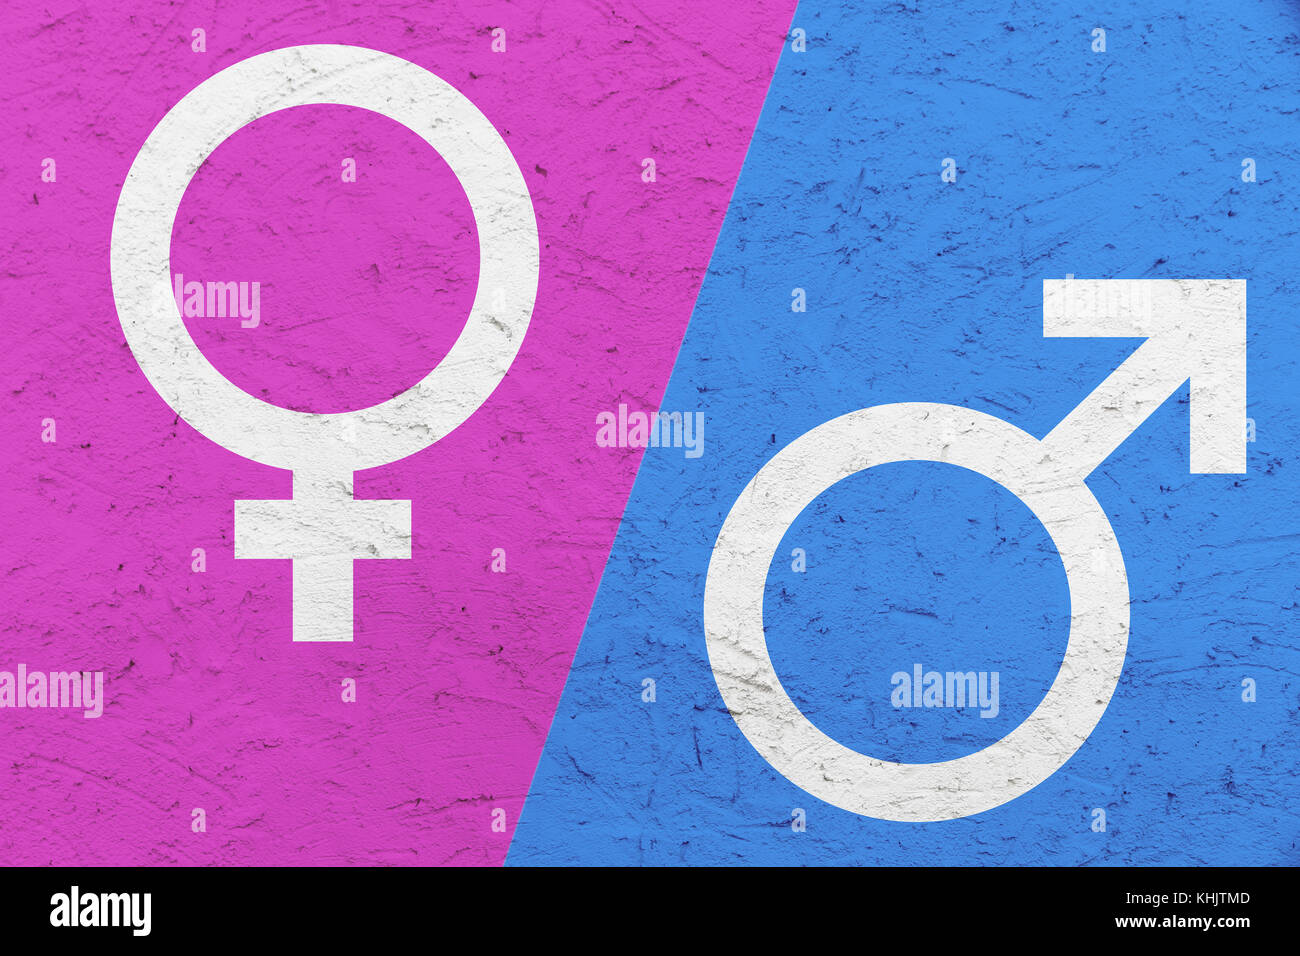 Male and female gender symbols (Mars and Venus signs) over pink and blue uneven texture background. Concept image for gender, feminine and masculine,  Stock Photo